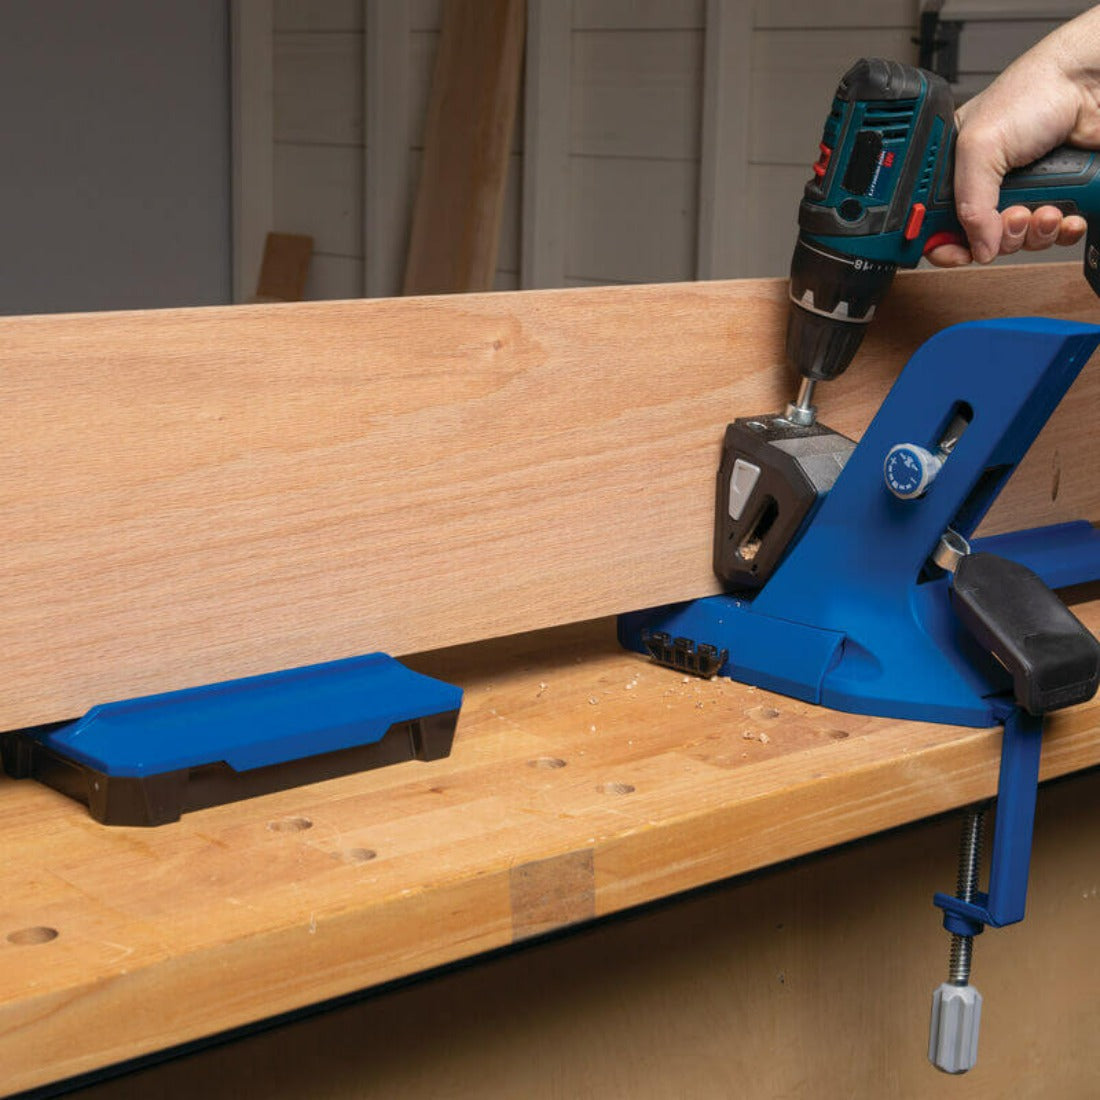 image shows a 720 jig fixed to bench with g clamp. Wings of docking station supporting a long piece of timber while being drilled for pocket holes.